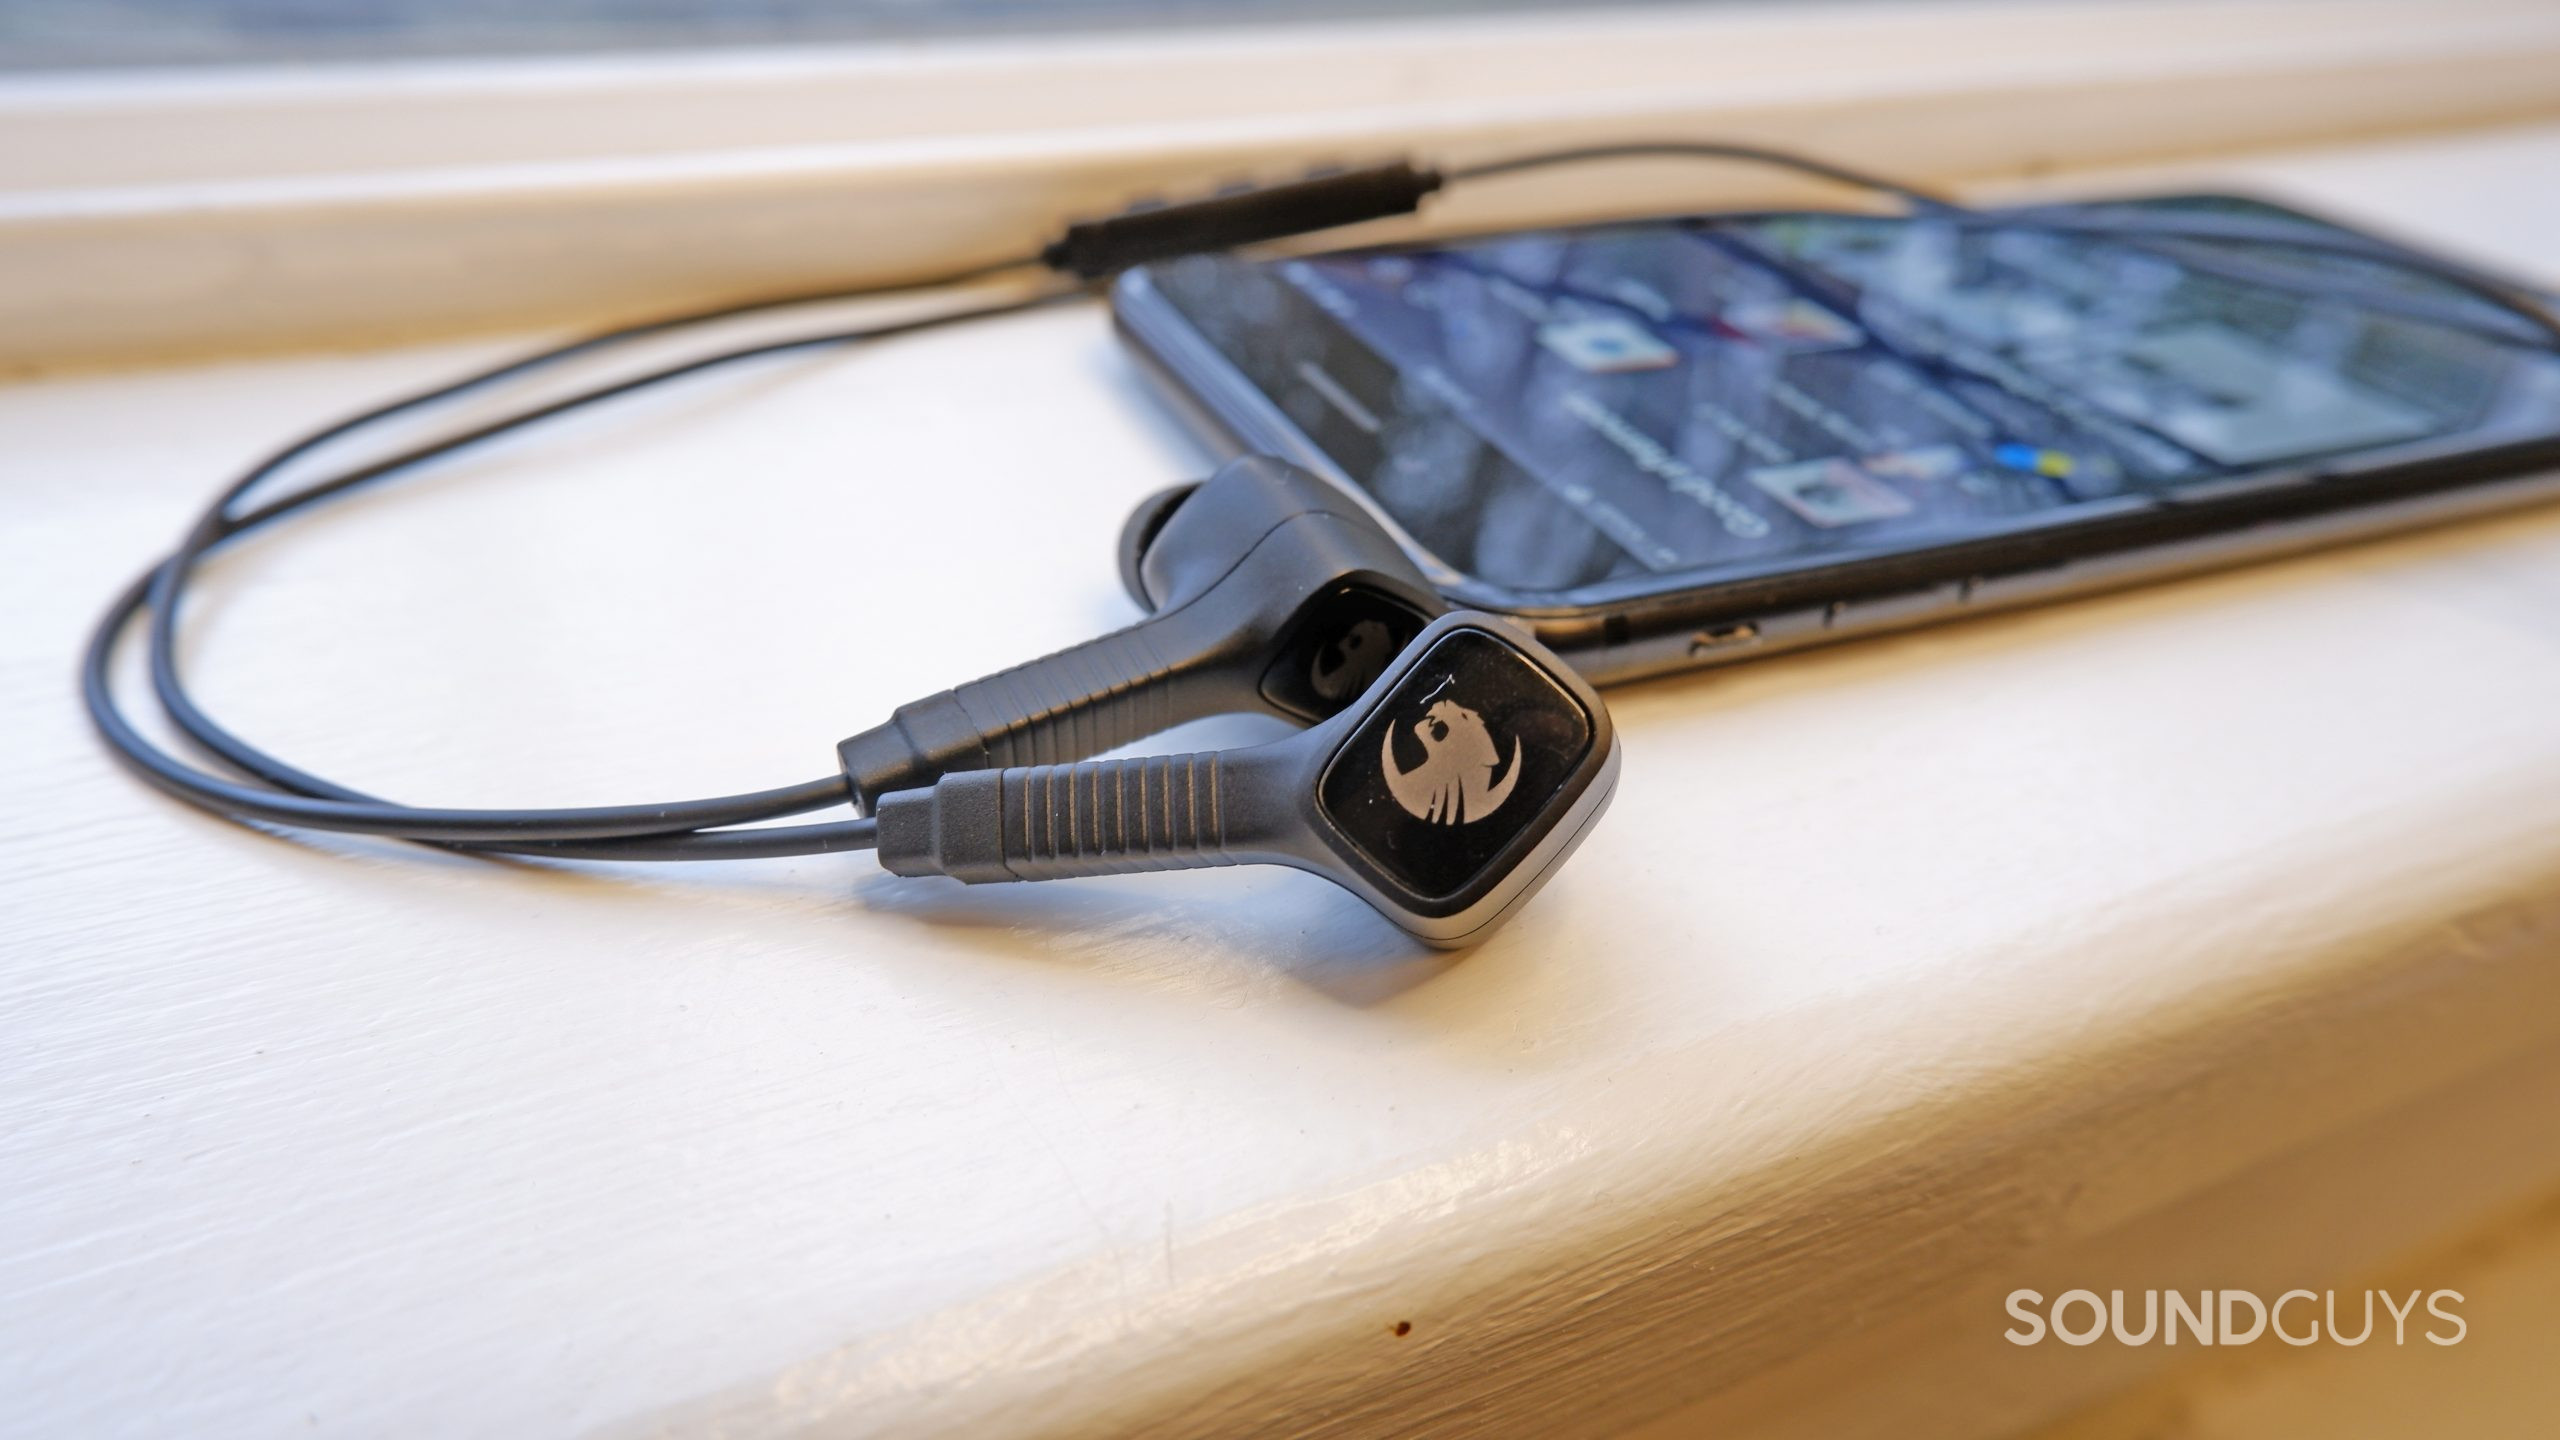 The ROCCAT Syn Buds Core plugged into a iPhone 7 Plus.